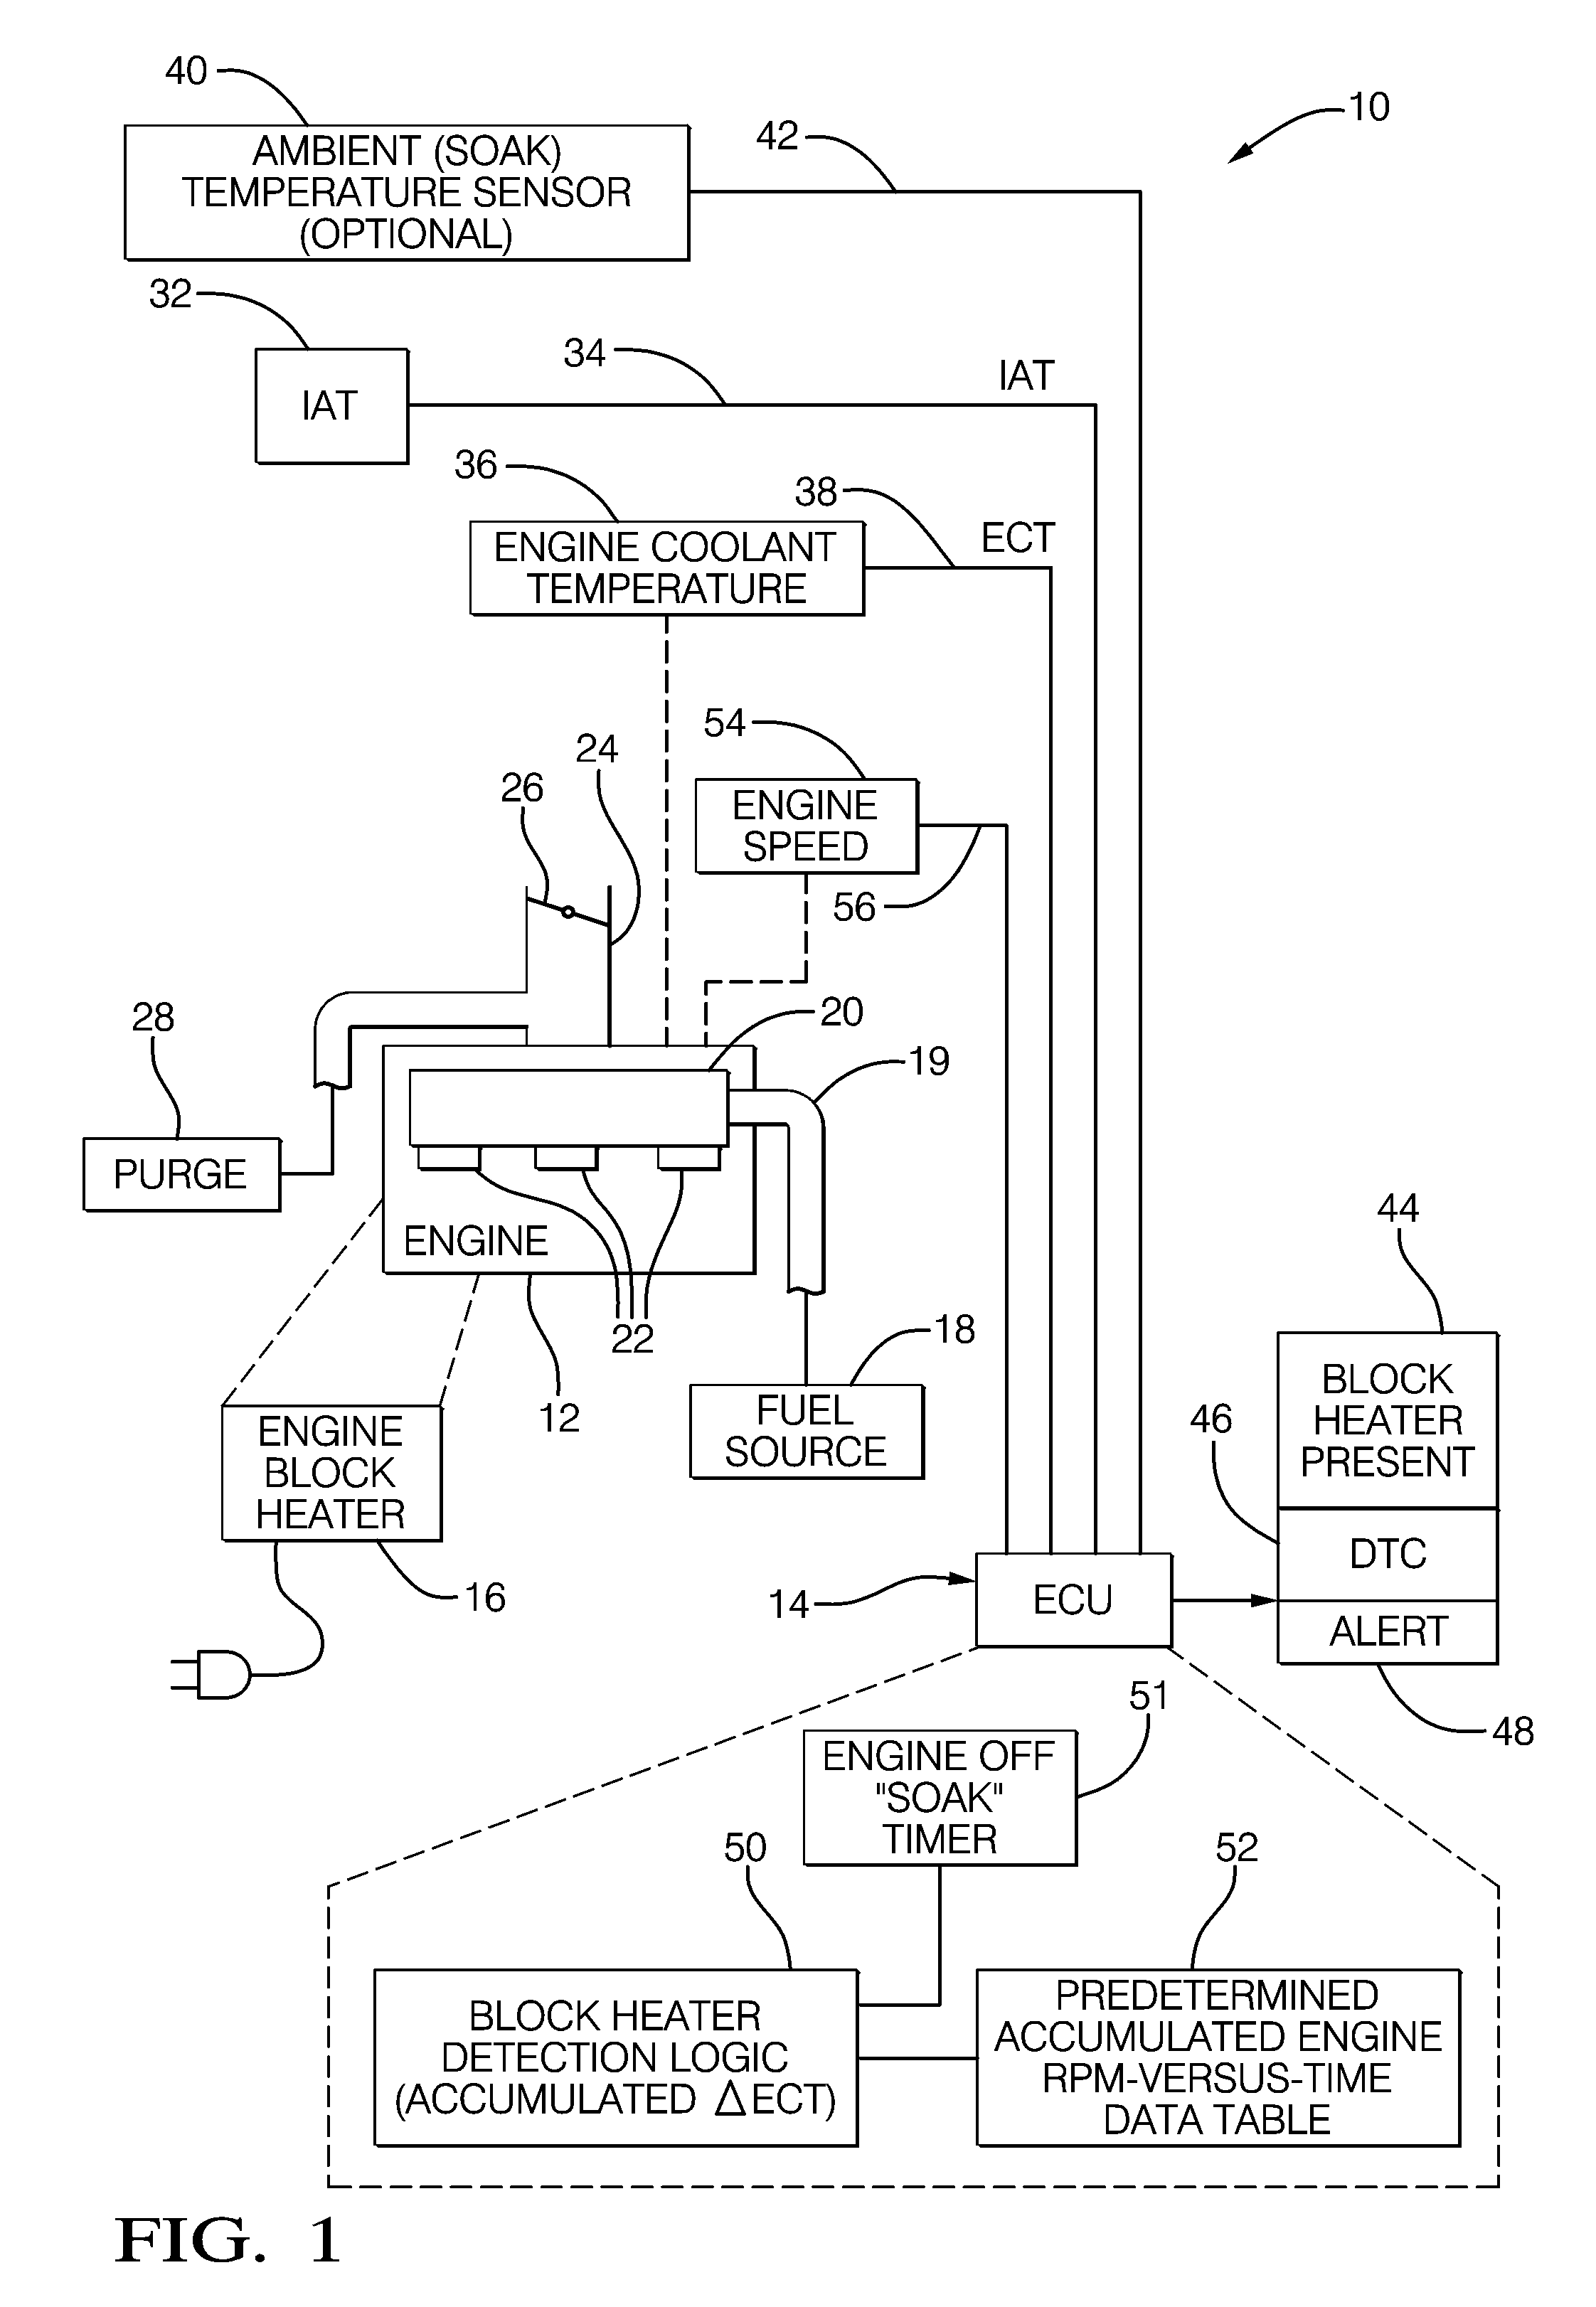 Method to detect the presence of a liquid-cooled engine supplemental heater